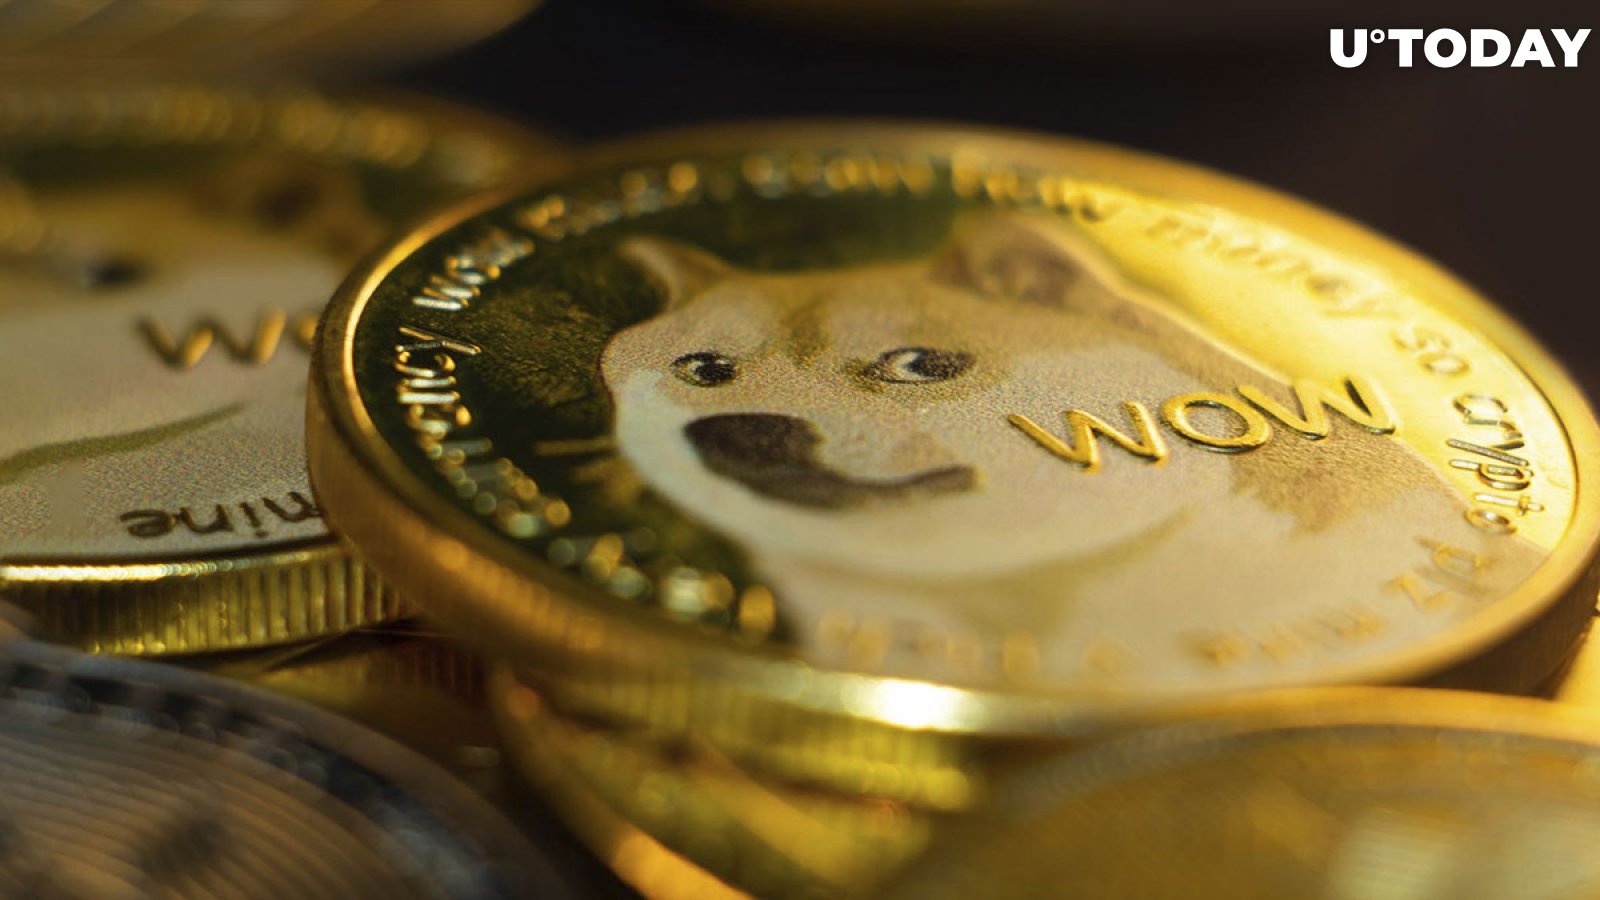 Dogecoin to $1? Top Trader Believes It's No Longer Just Meme